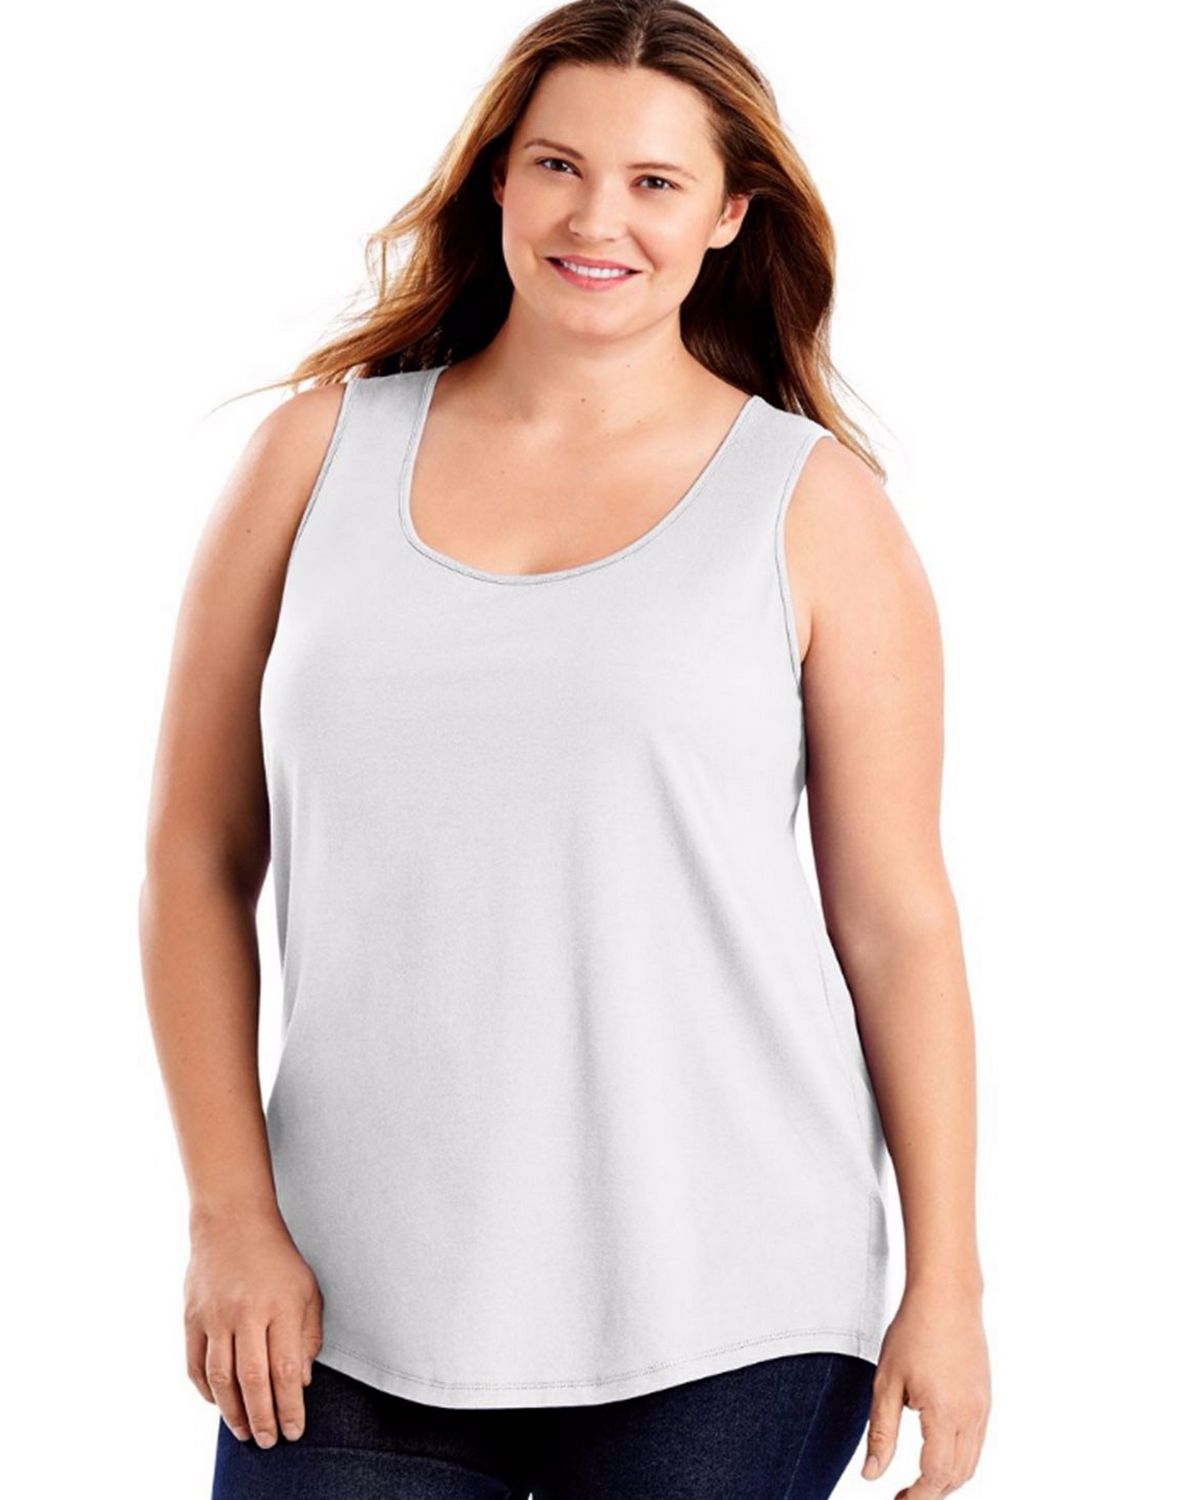 Size Chart for Just My Size OJ207 Cotton Jersey Shirttail Womens Tank Top